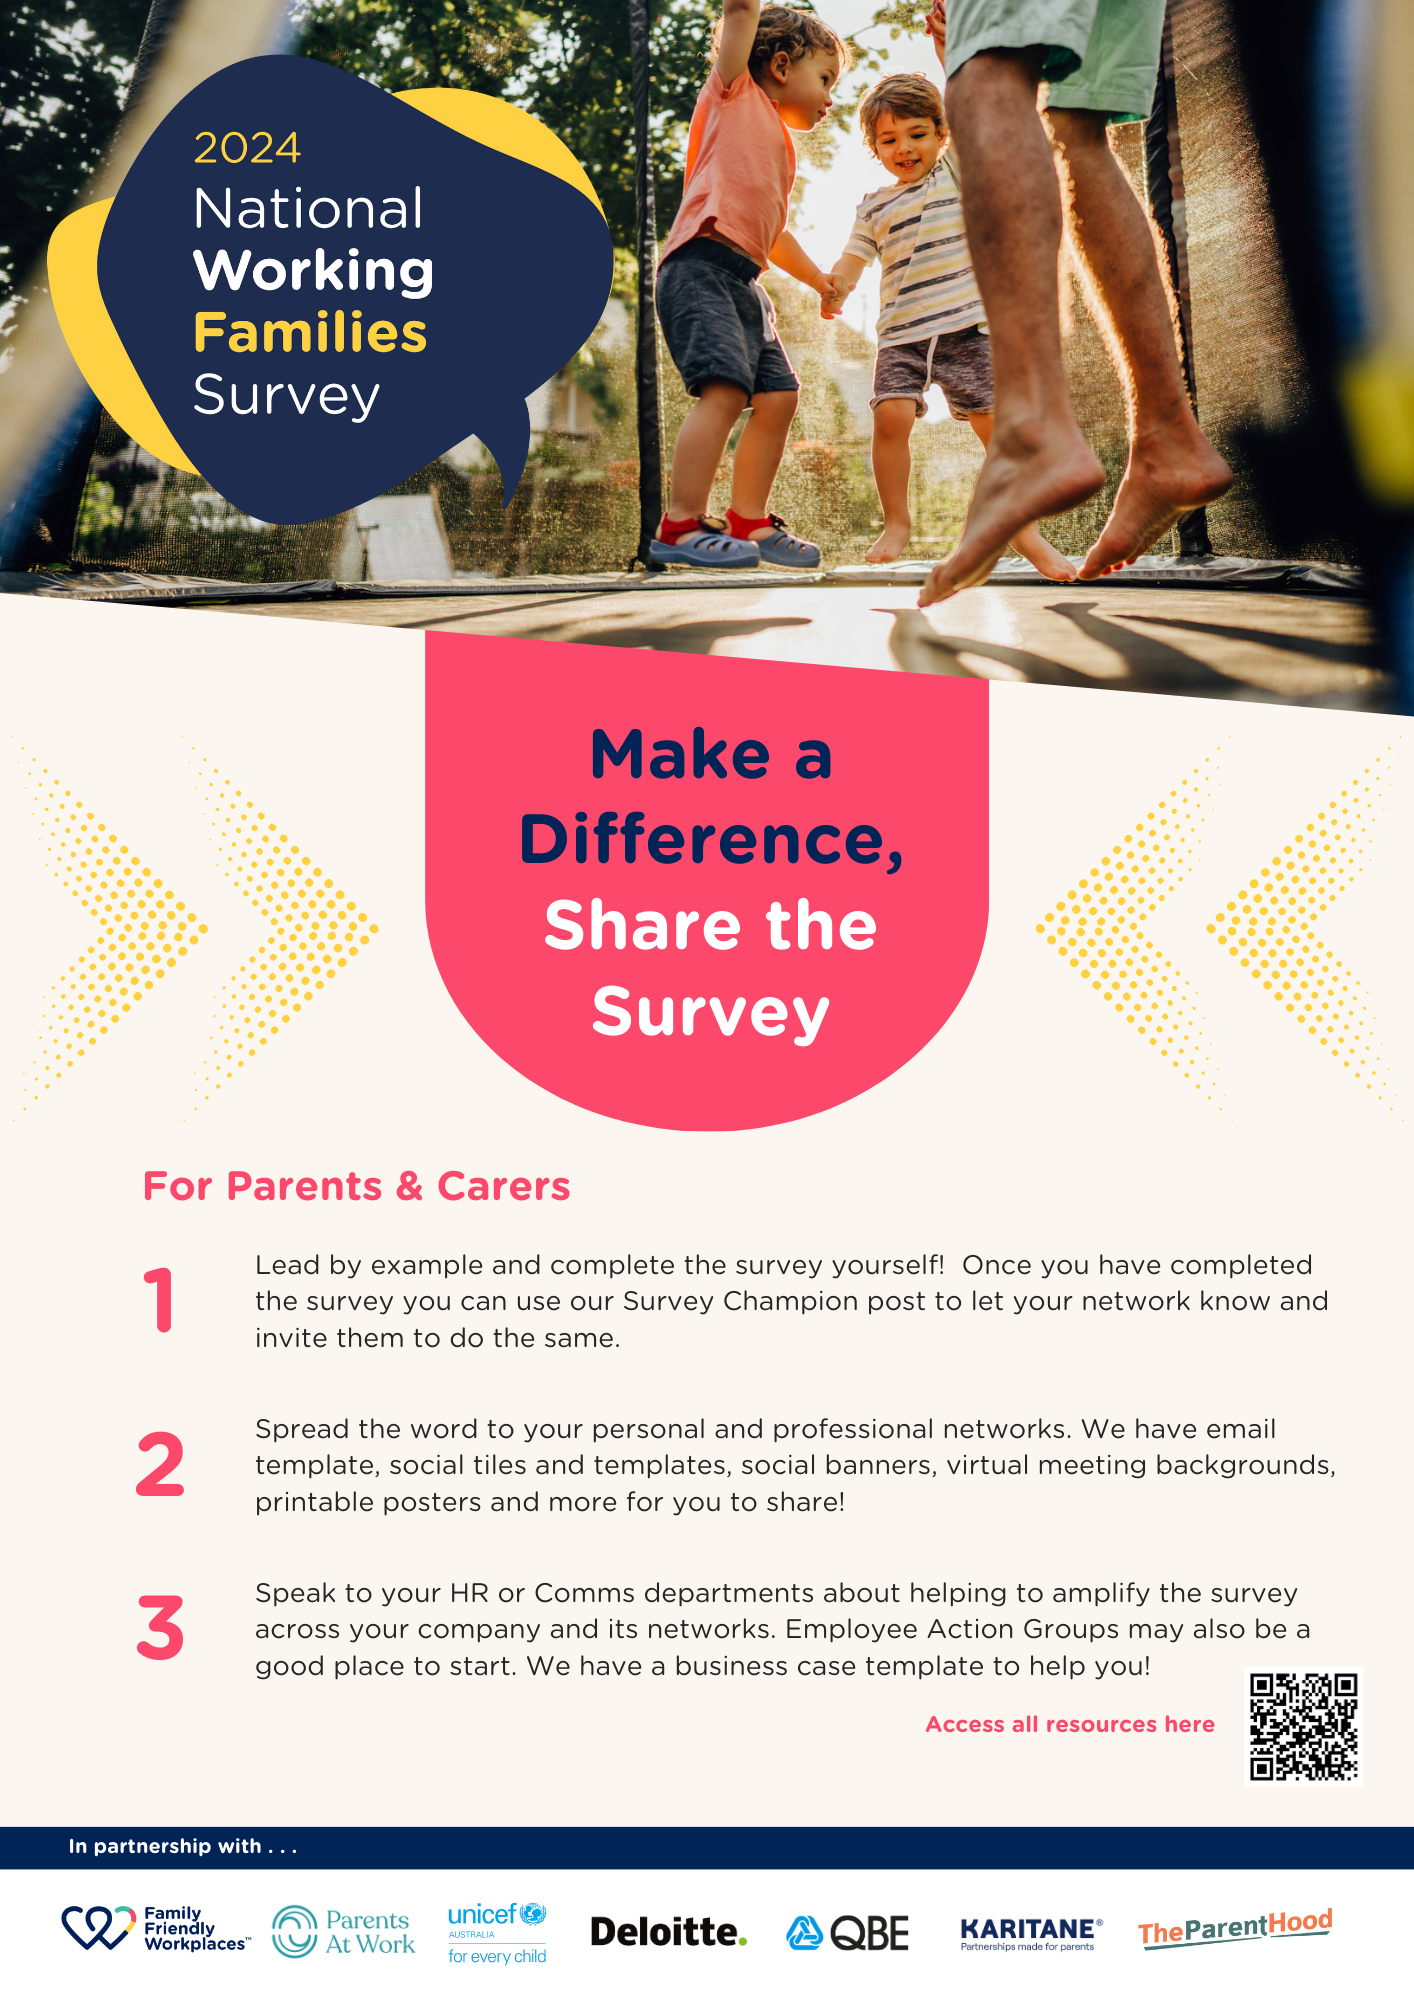 How to Promote the Survey ~ For Parents & Carers